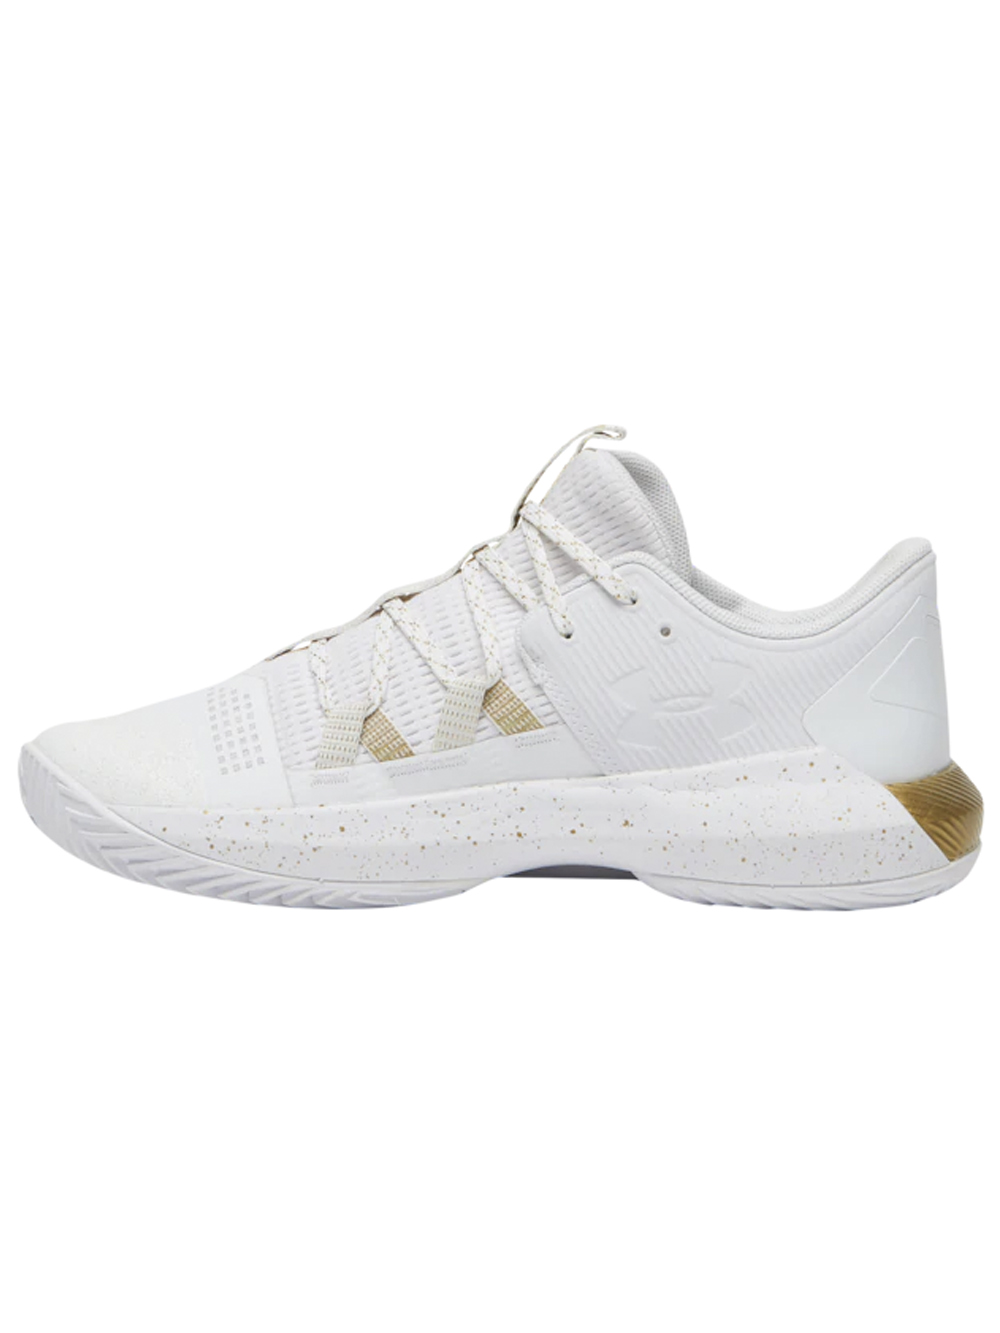 under armor white shoes off 61% - www 